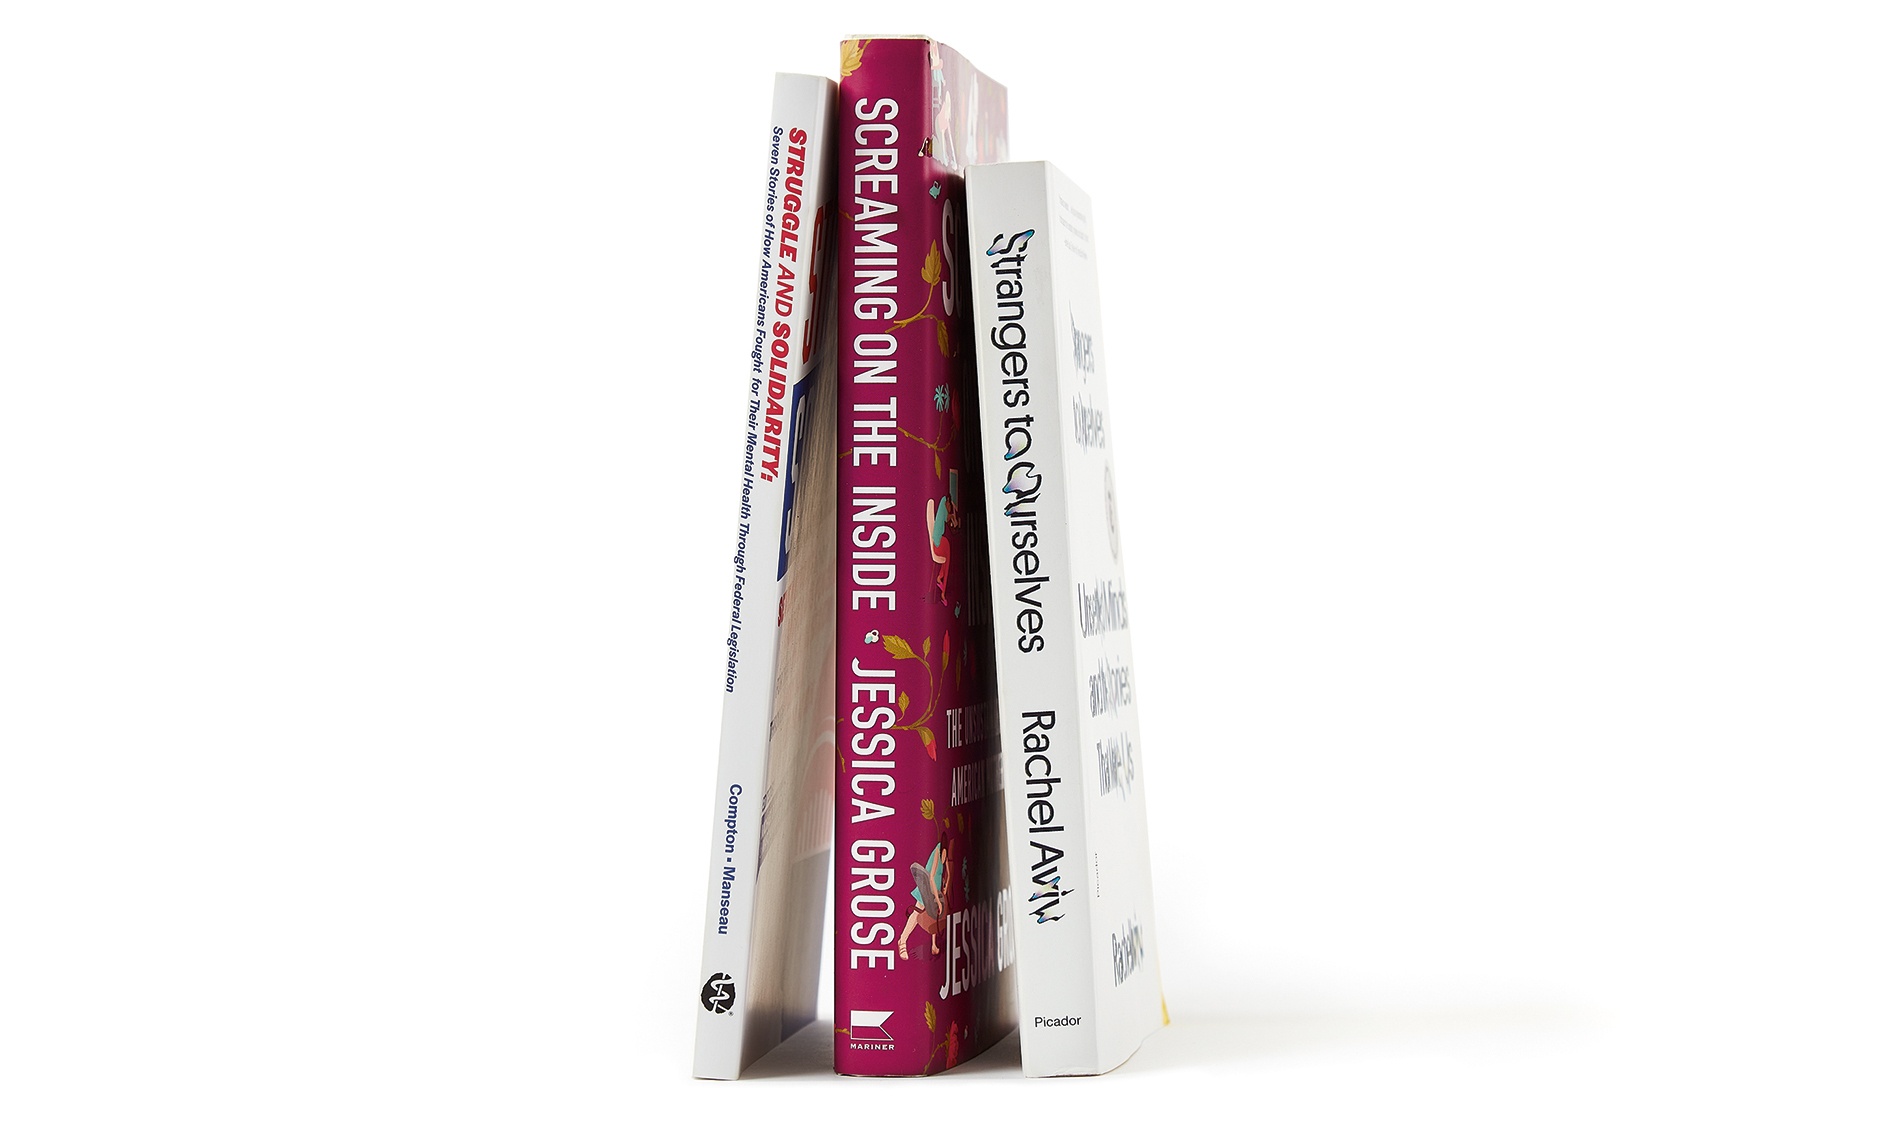 Image of book spines by Jessica Grose, Michael Compton and Marc Manseau, and Rachel Aviv